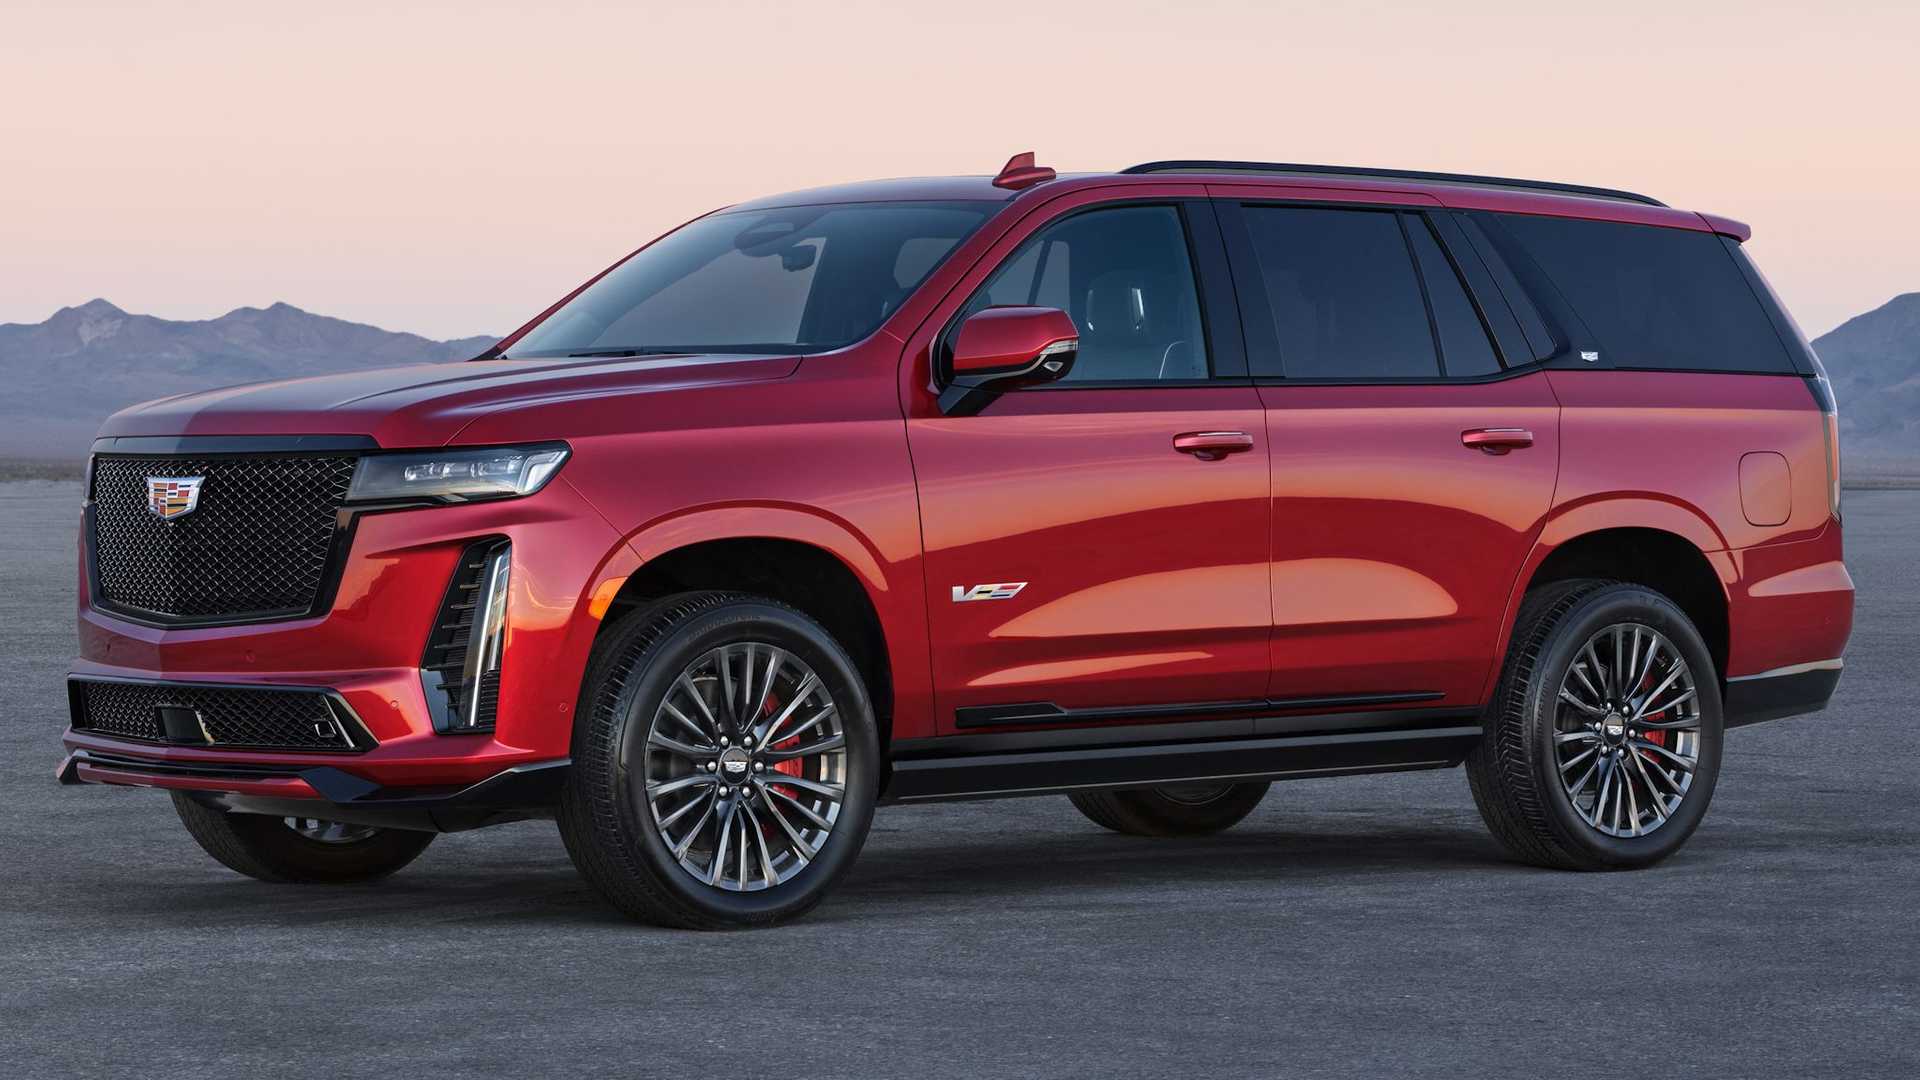 The 2023 Cadillac Escalade-V is expected to have a V8 engine